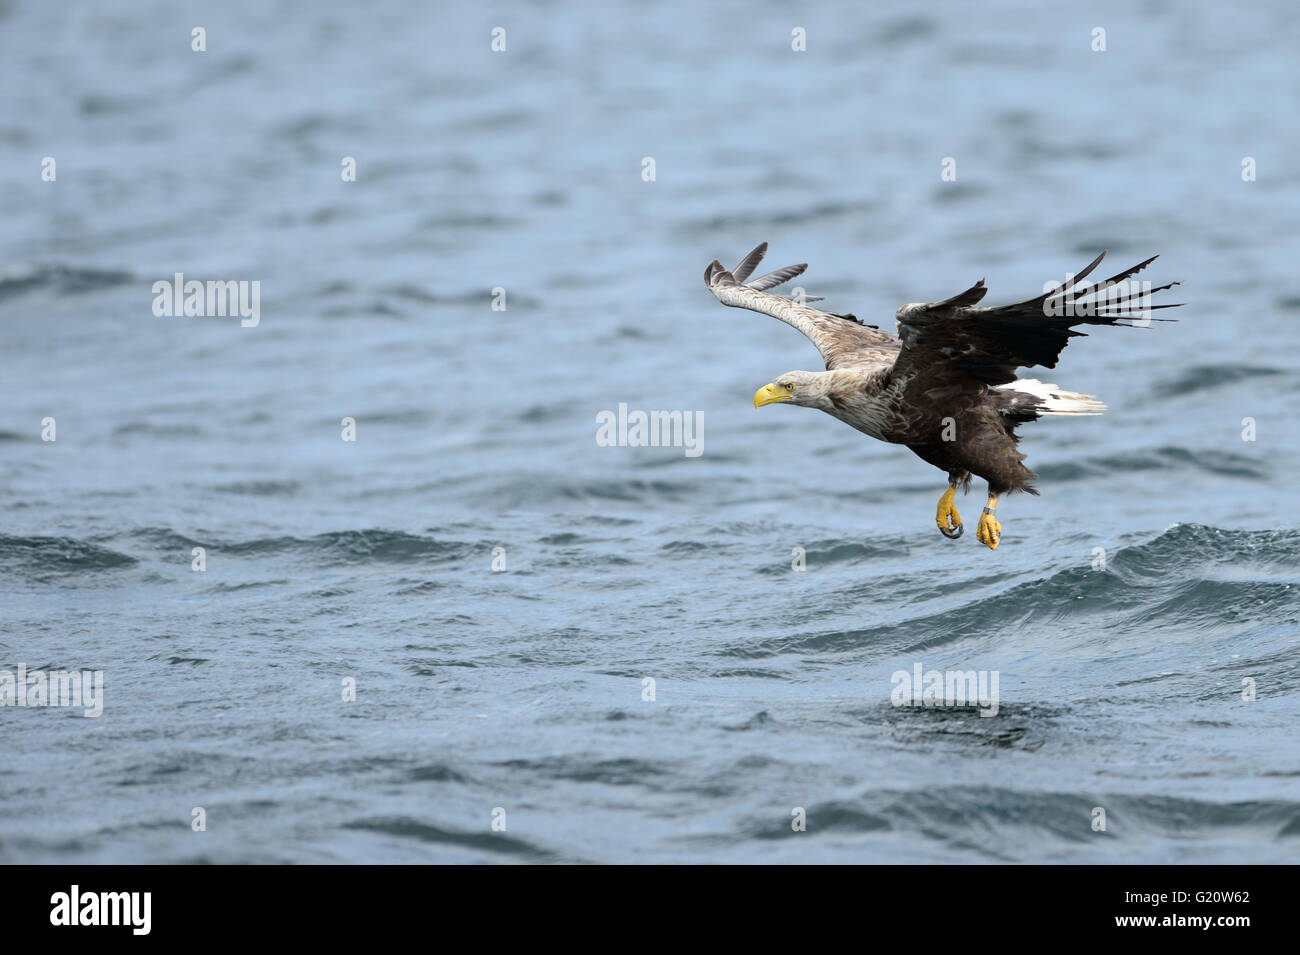 White-tailed sea eagle in flight to catch a fish from the water, Loch na Keal, Isle of Mull, Scotland Stock Photo